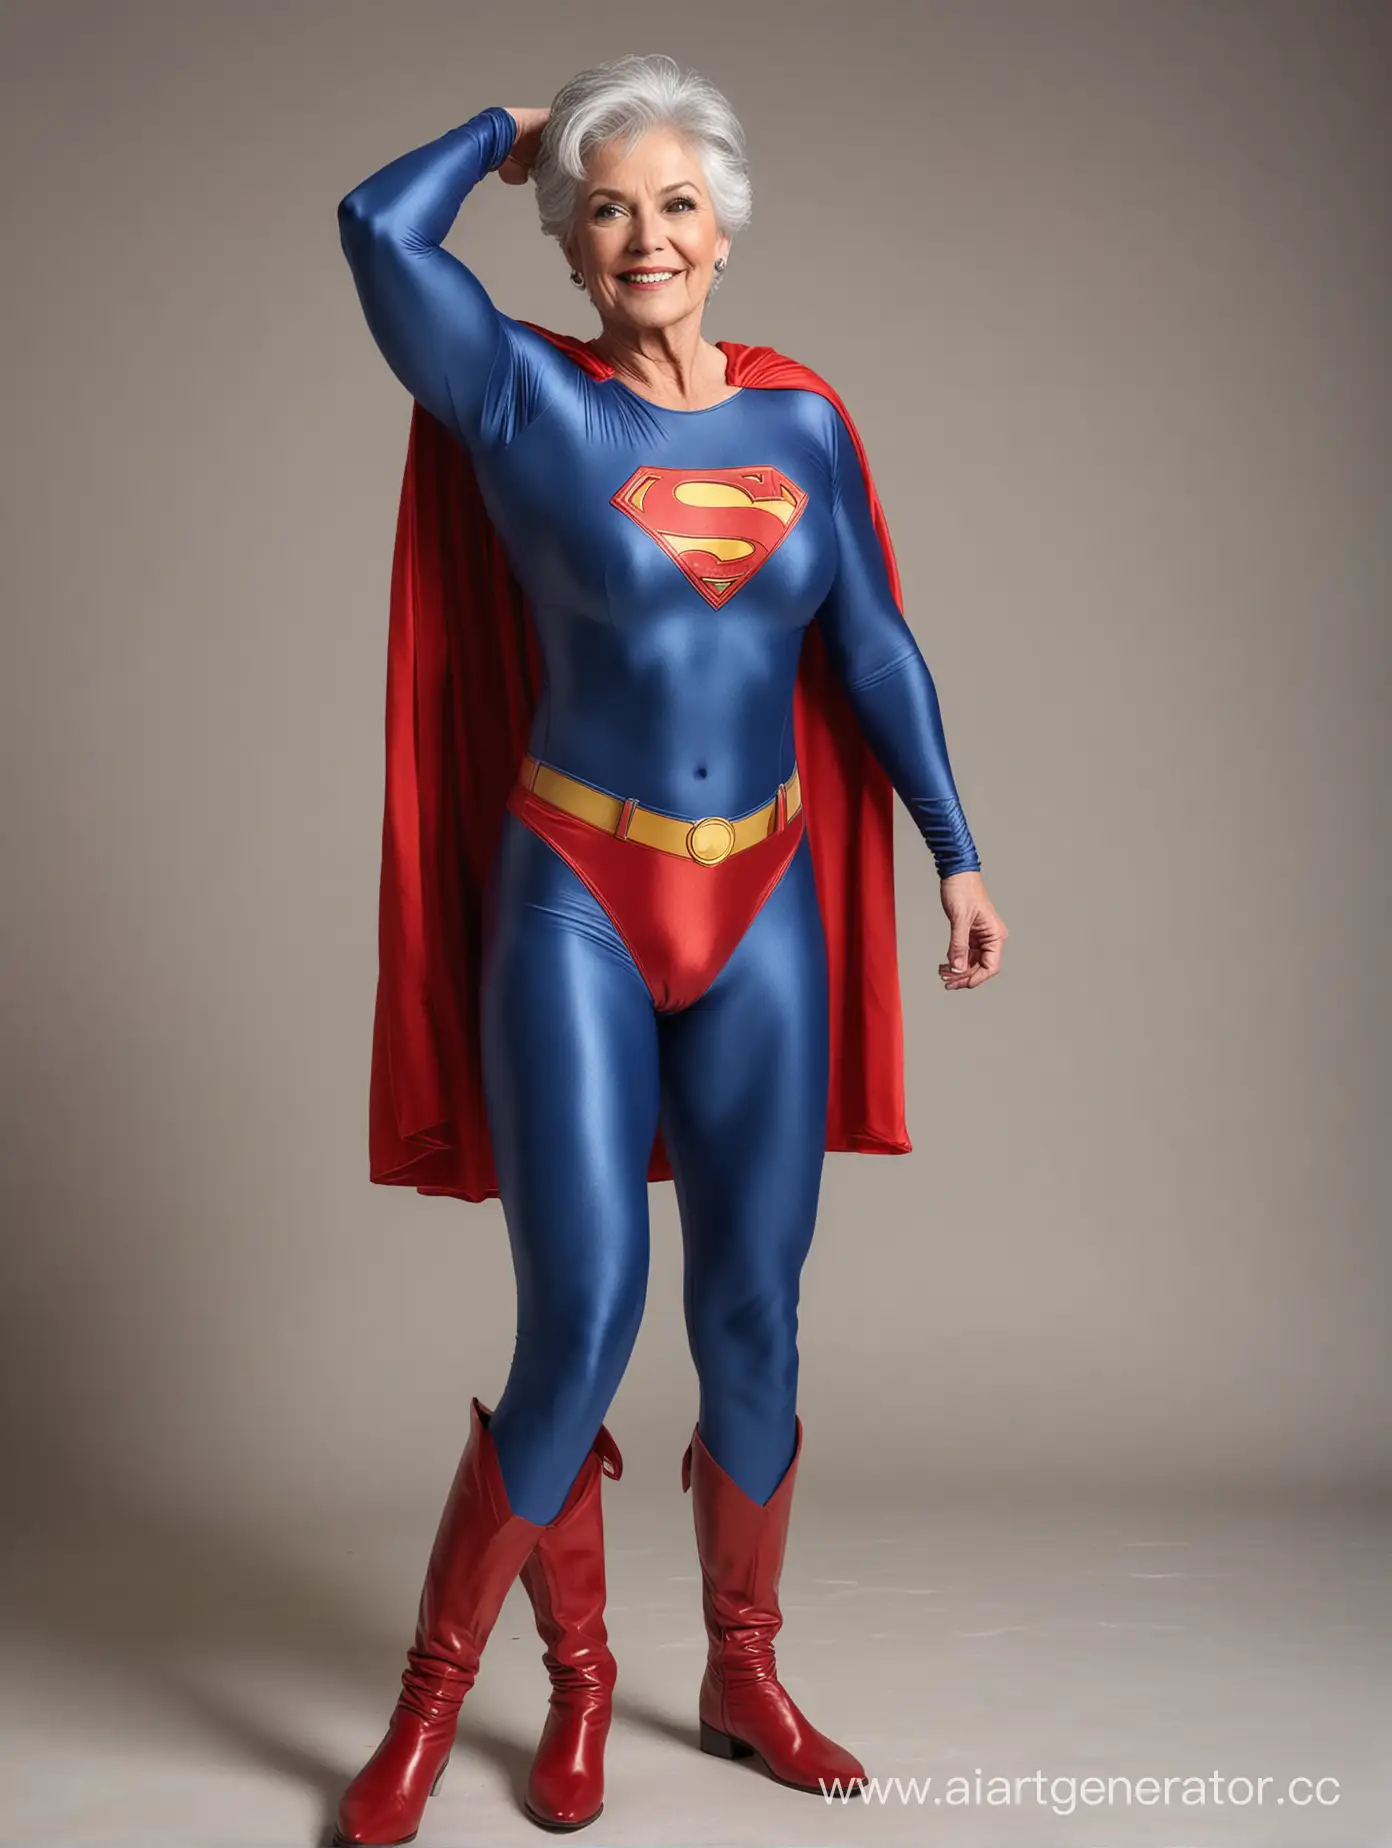 Confident-Elderly-Woman-Flexing-Muscles-in-Superman-Costume